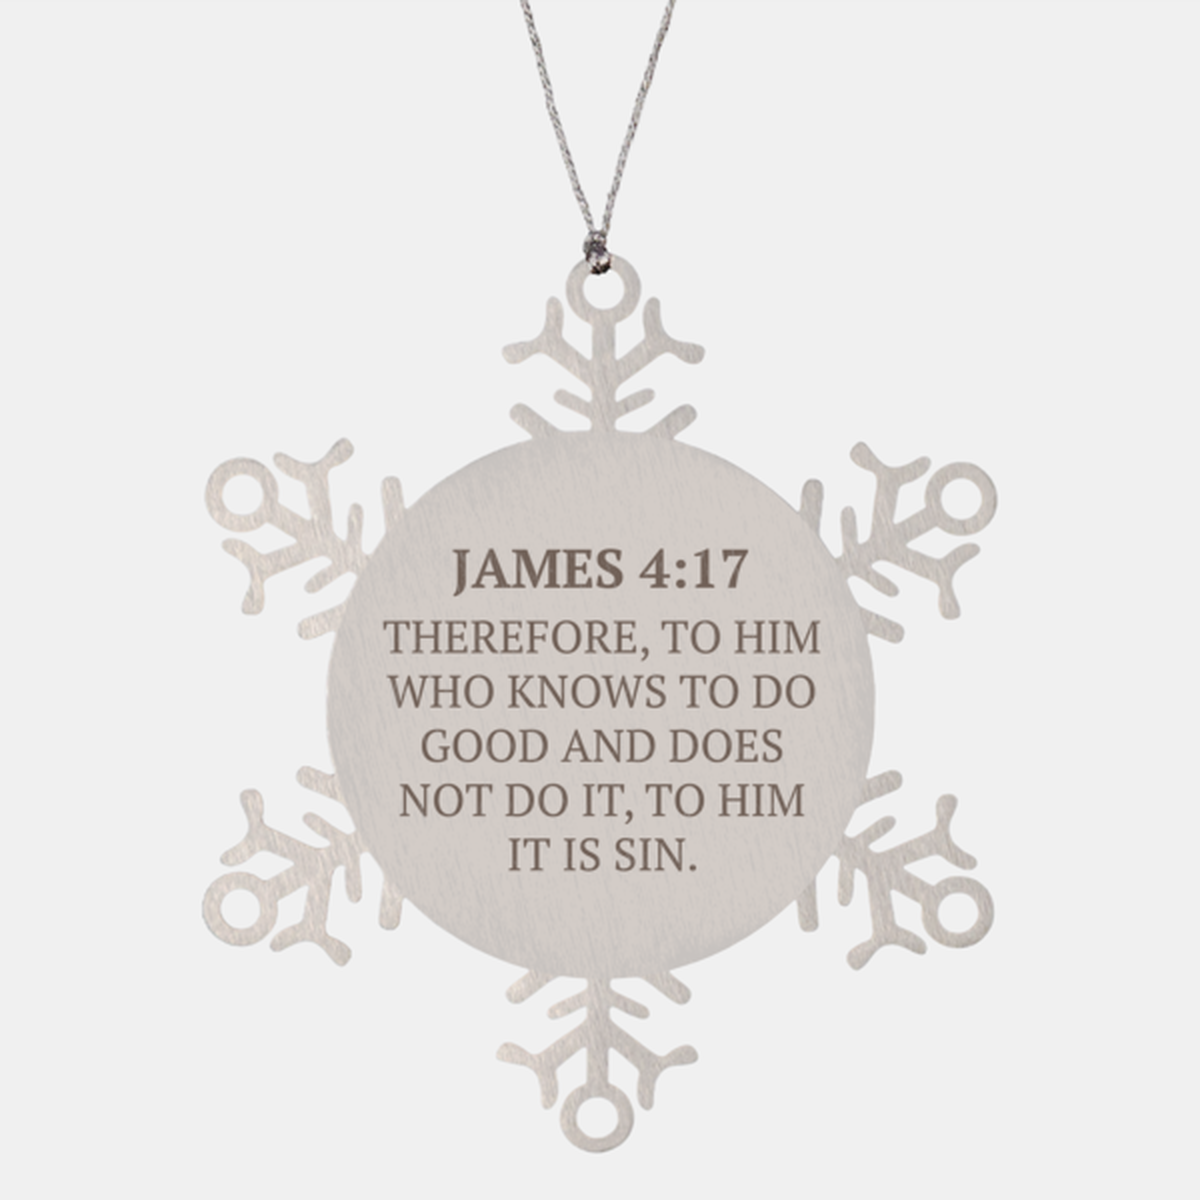 Christian Ornaments For Christmas Tree, Therefore, To Him Who Knows To Do Good, Religious Christmas Decorations, Scripture Ornaments Gifts, Bible Verse Ornament